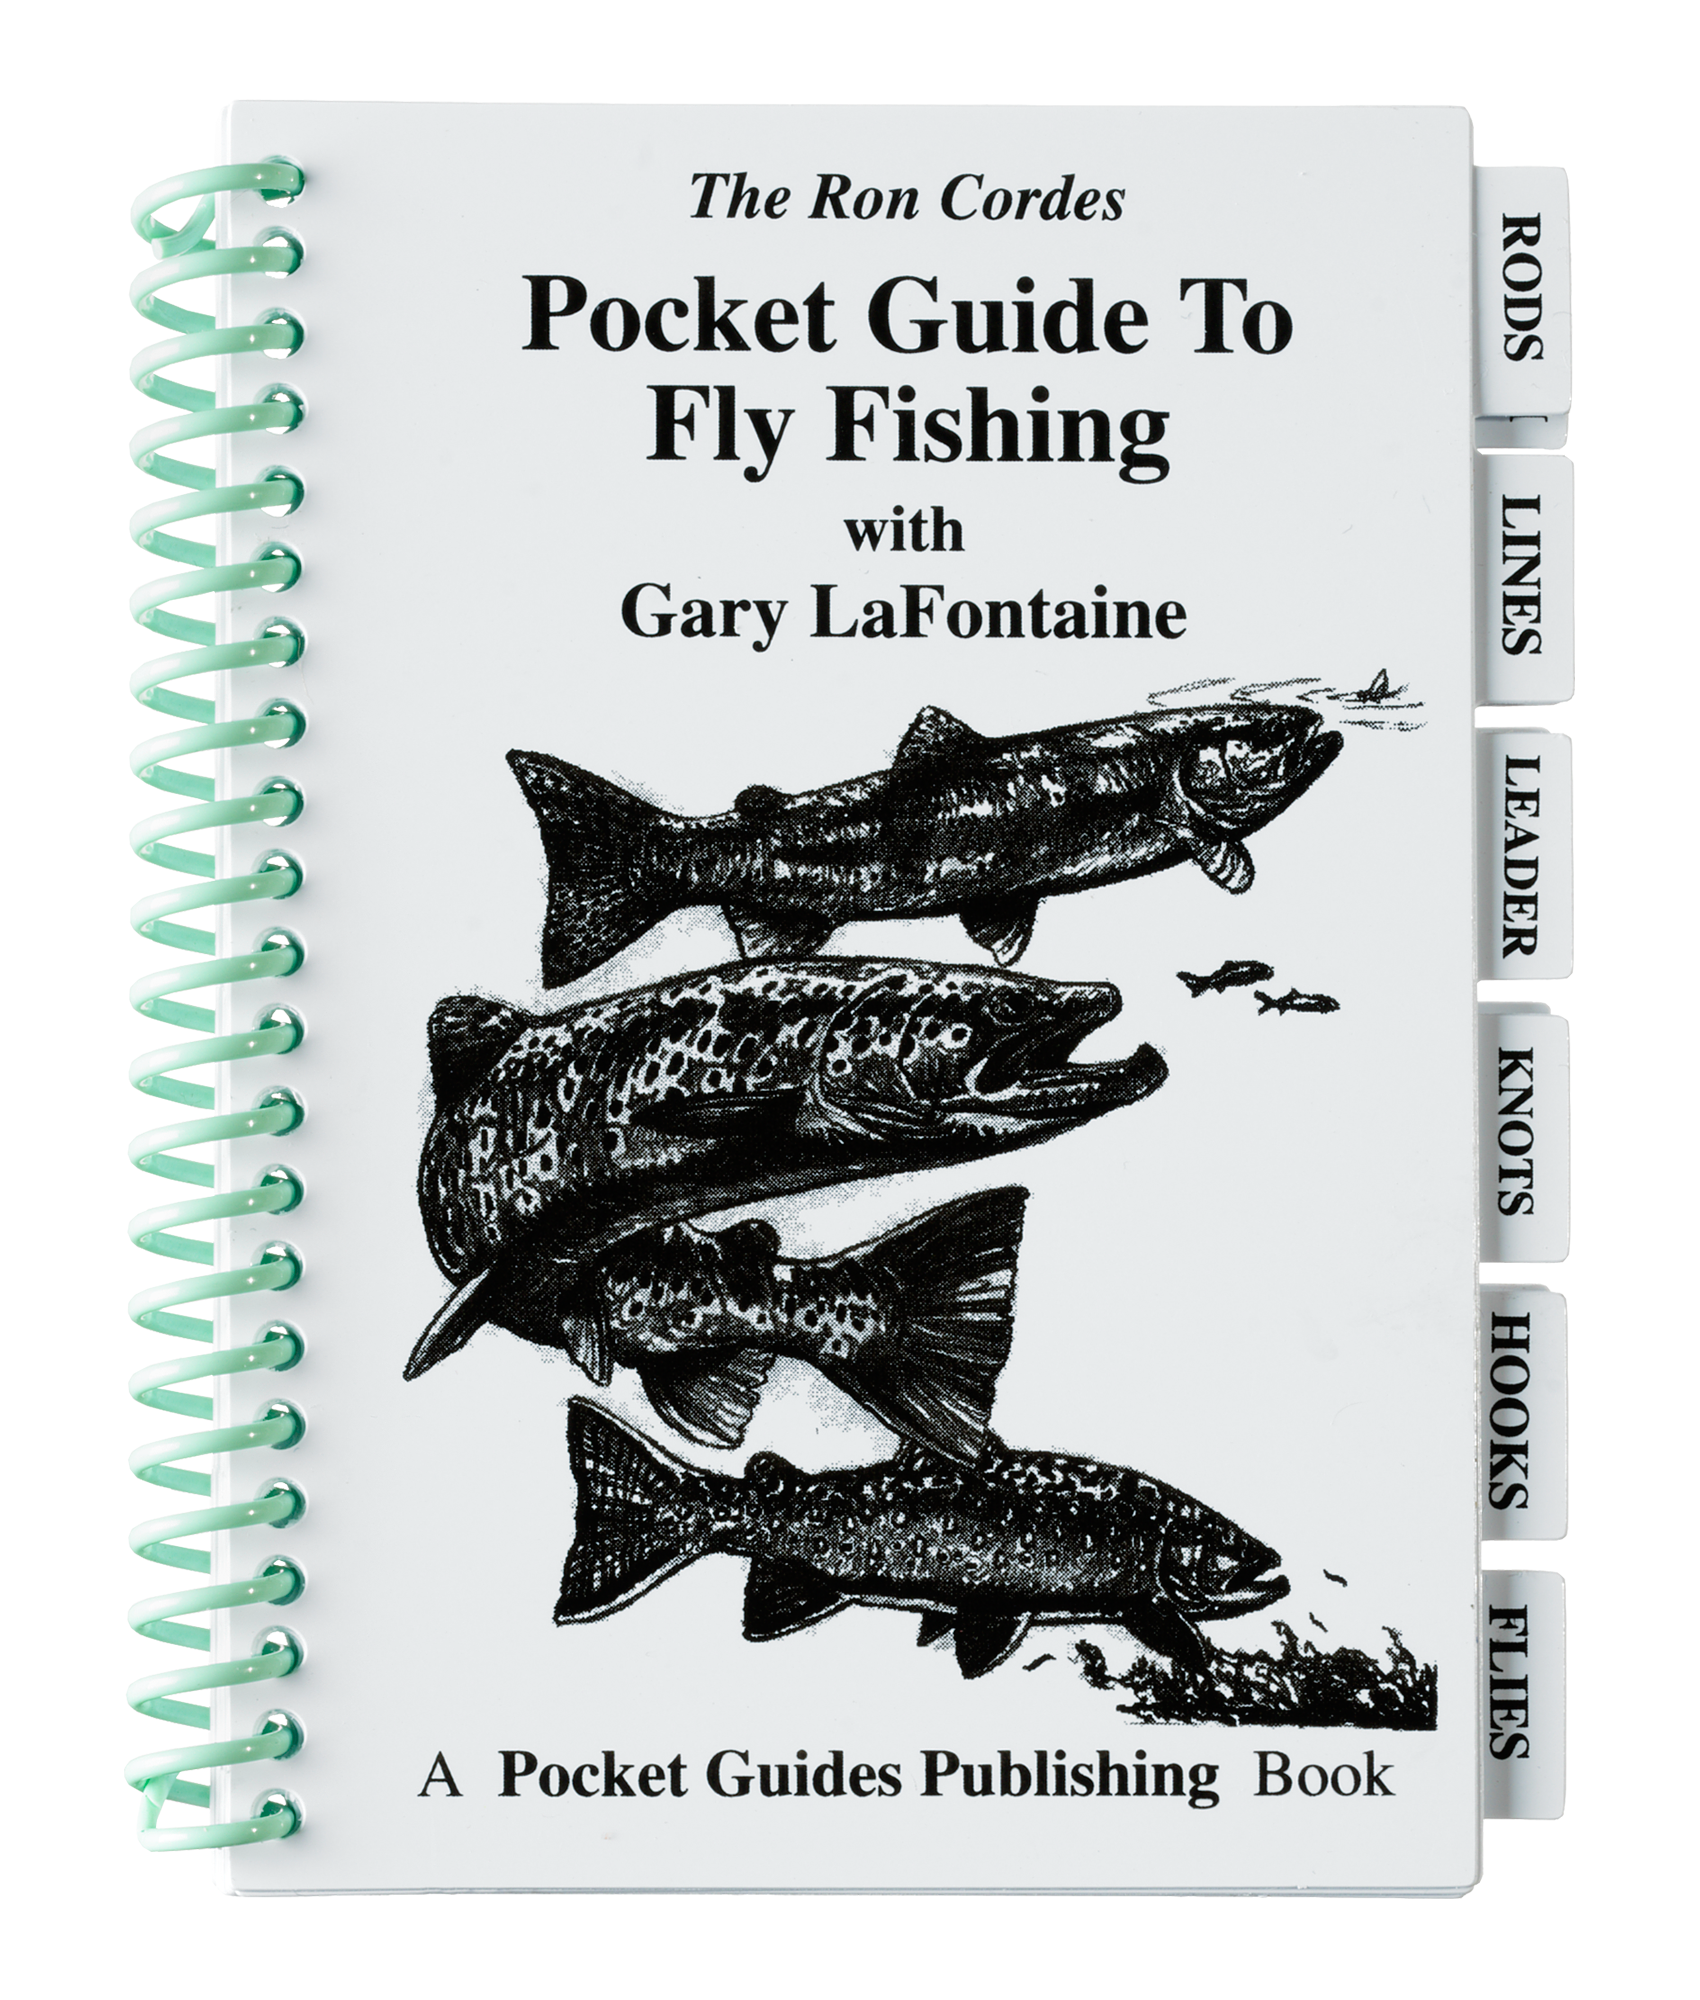 Pocket Guide to Fly Fishing Book by Ron Cordes and Gary LaFontaine